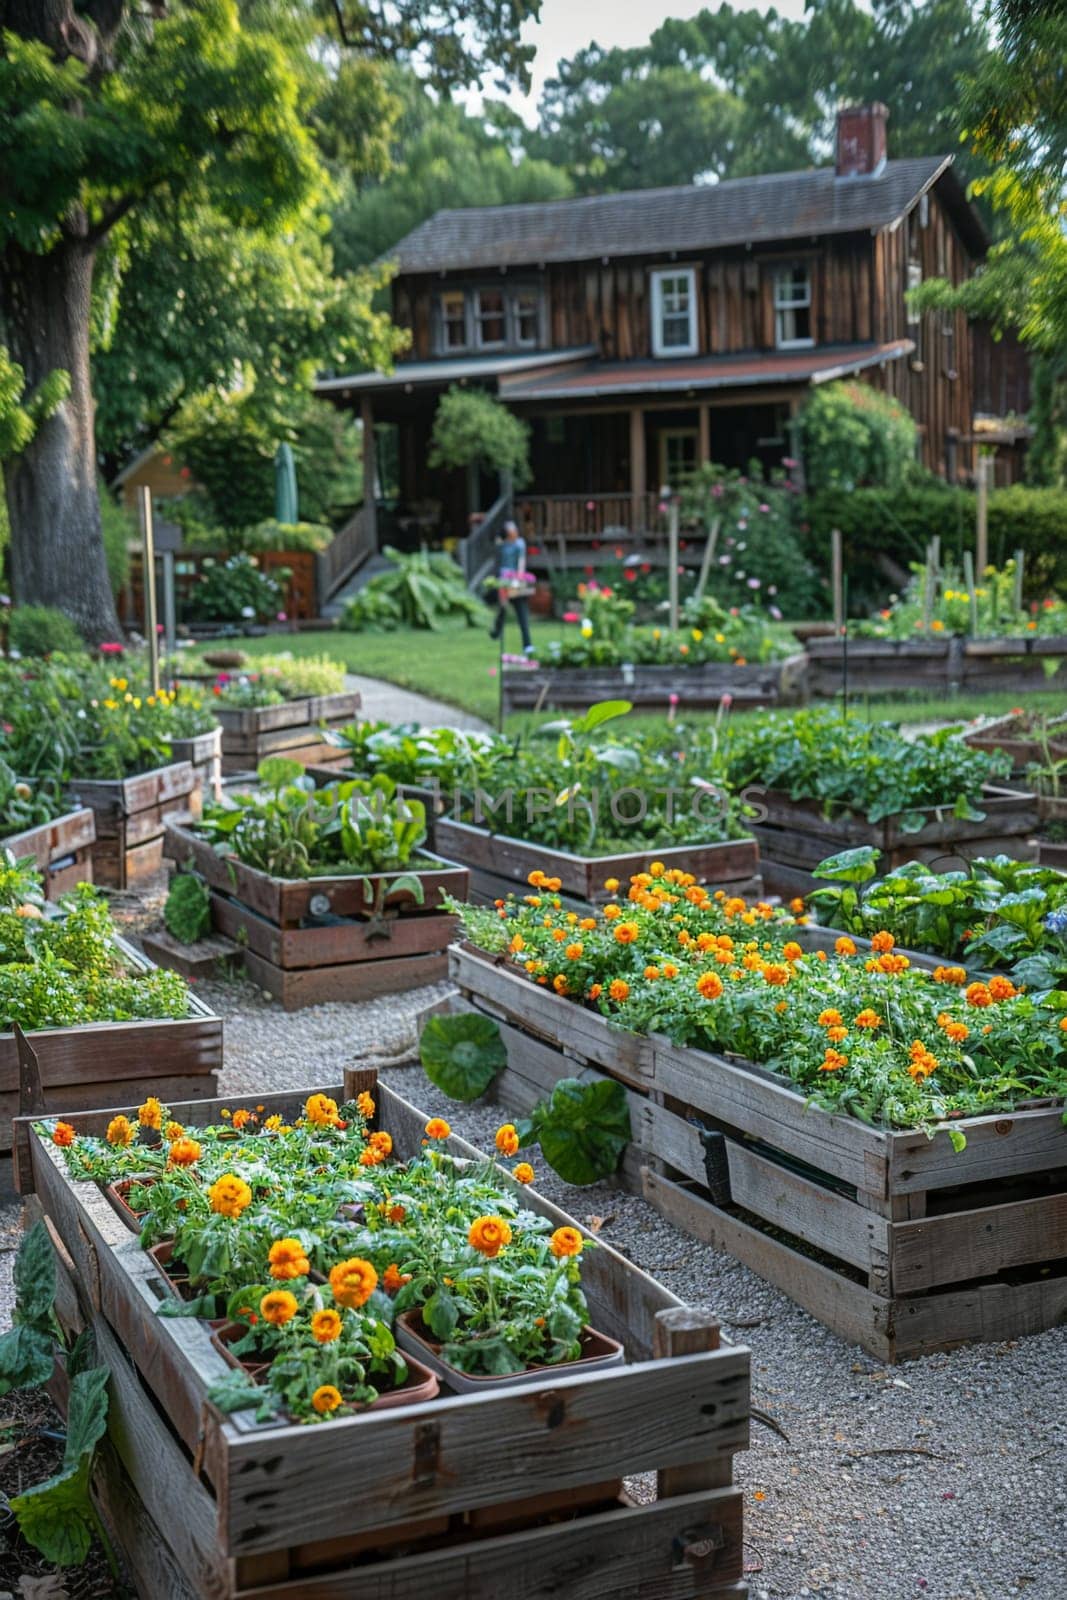 Community Gardens Cultivate Neighborly Bonds in Business of Urban Planting by Benzoix